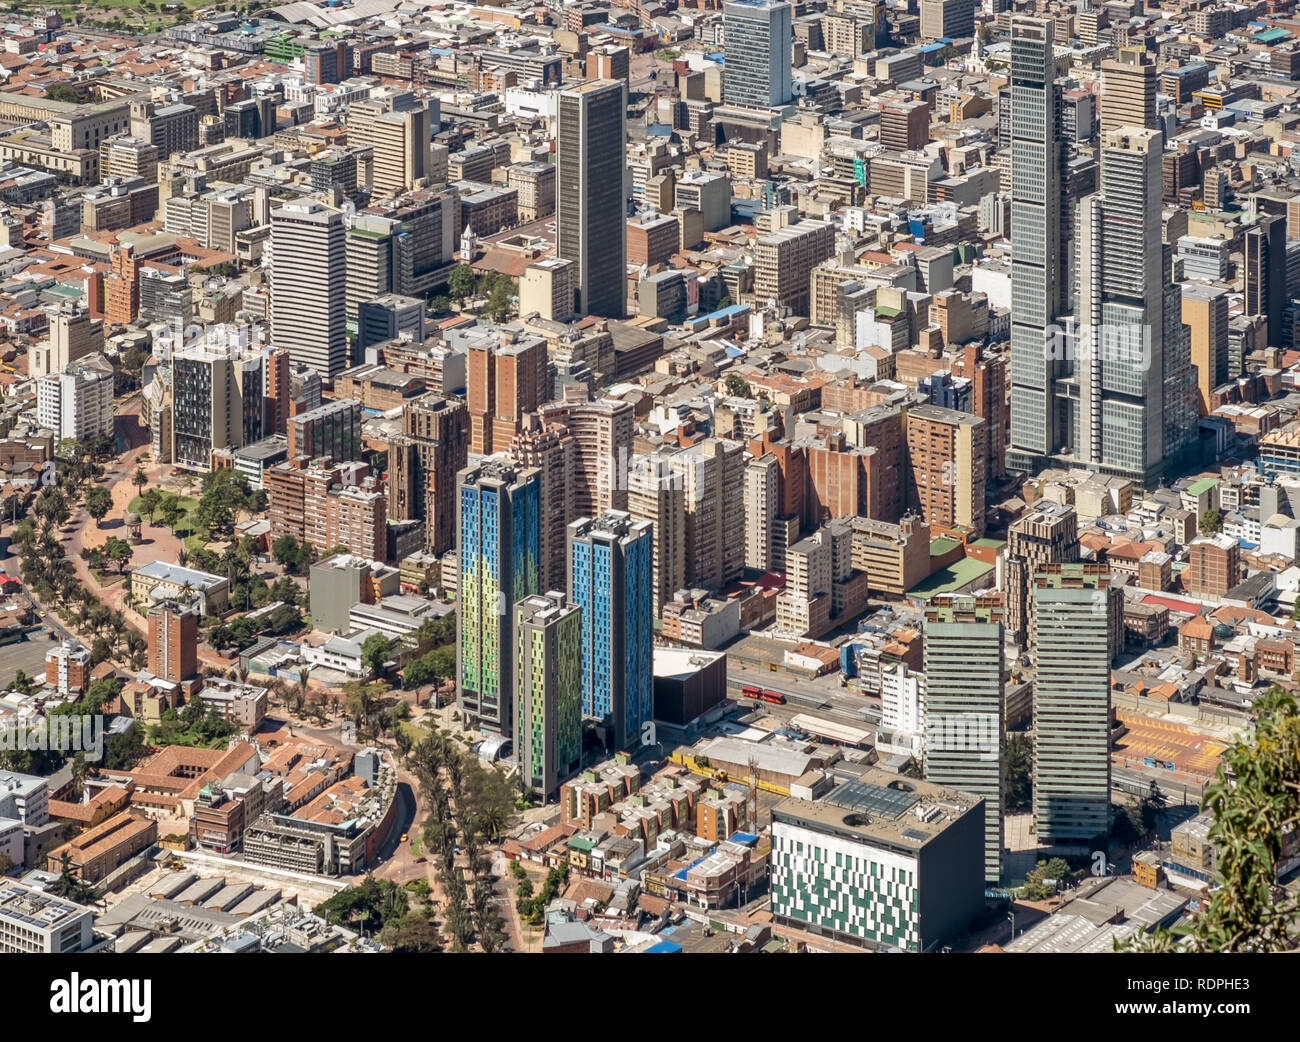 Business district of the city of Bogota, Colombia. Viewed from Monserrate. Stock Photo